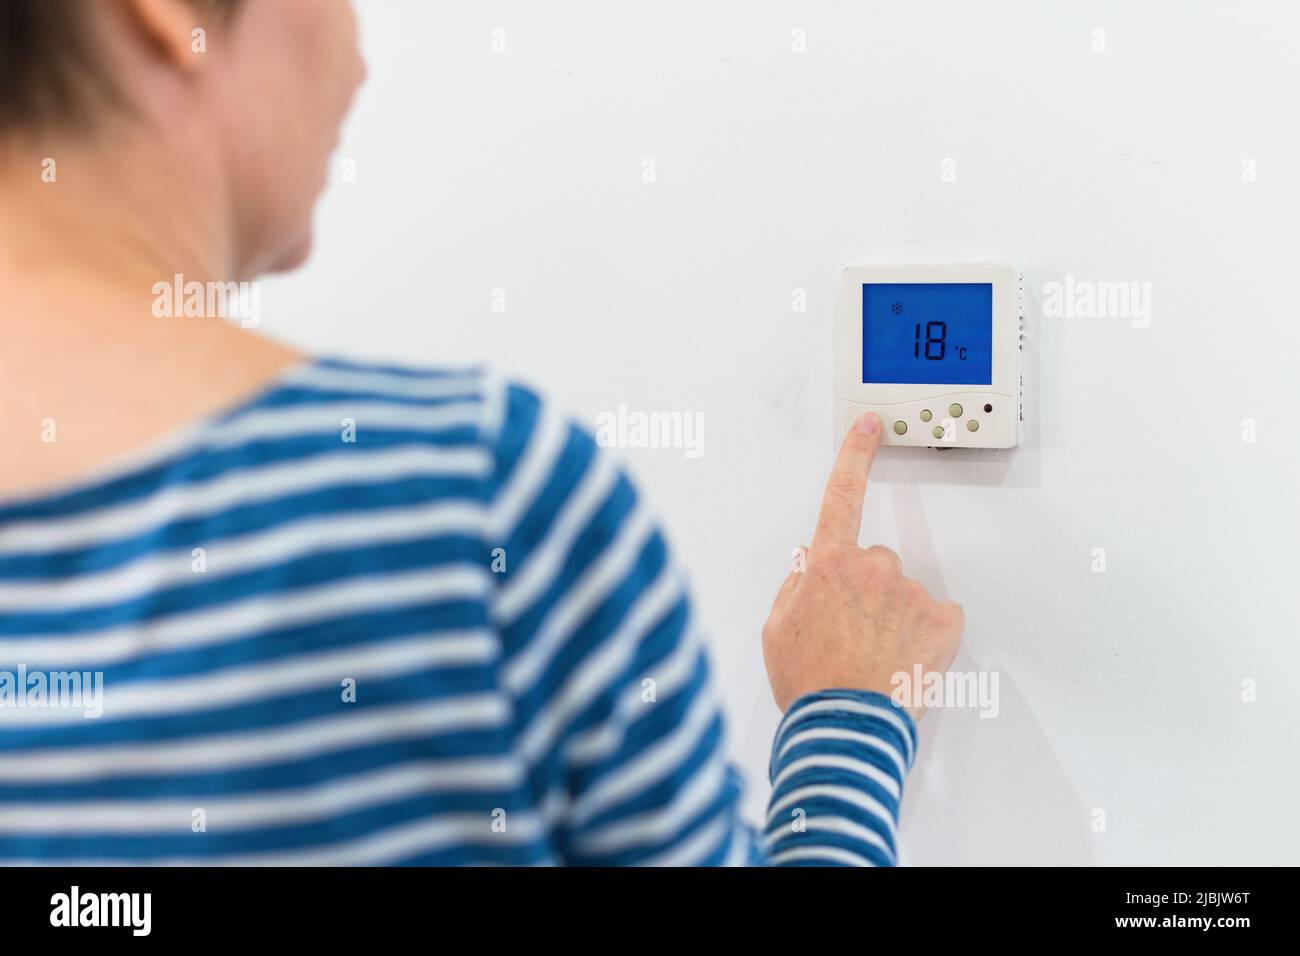 Female hand using of home heating and cooling system control unit, selective focus Stock Photo